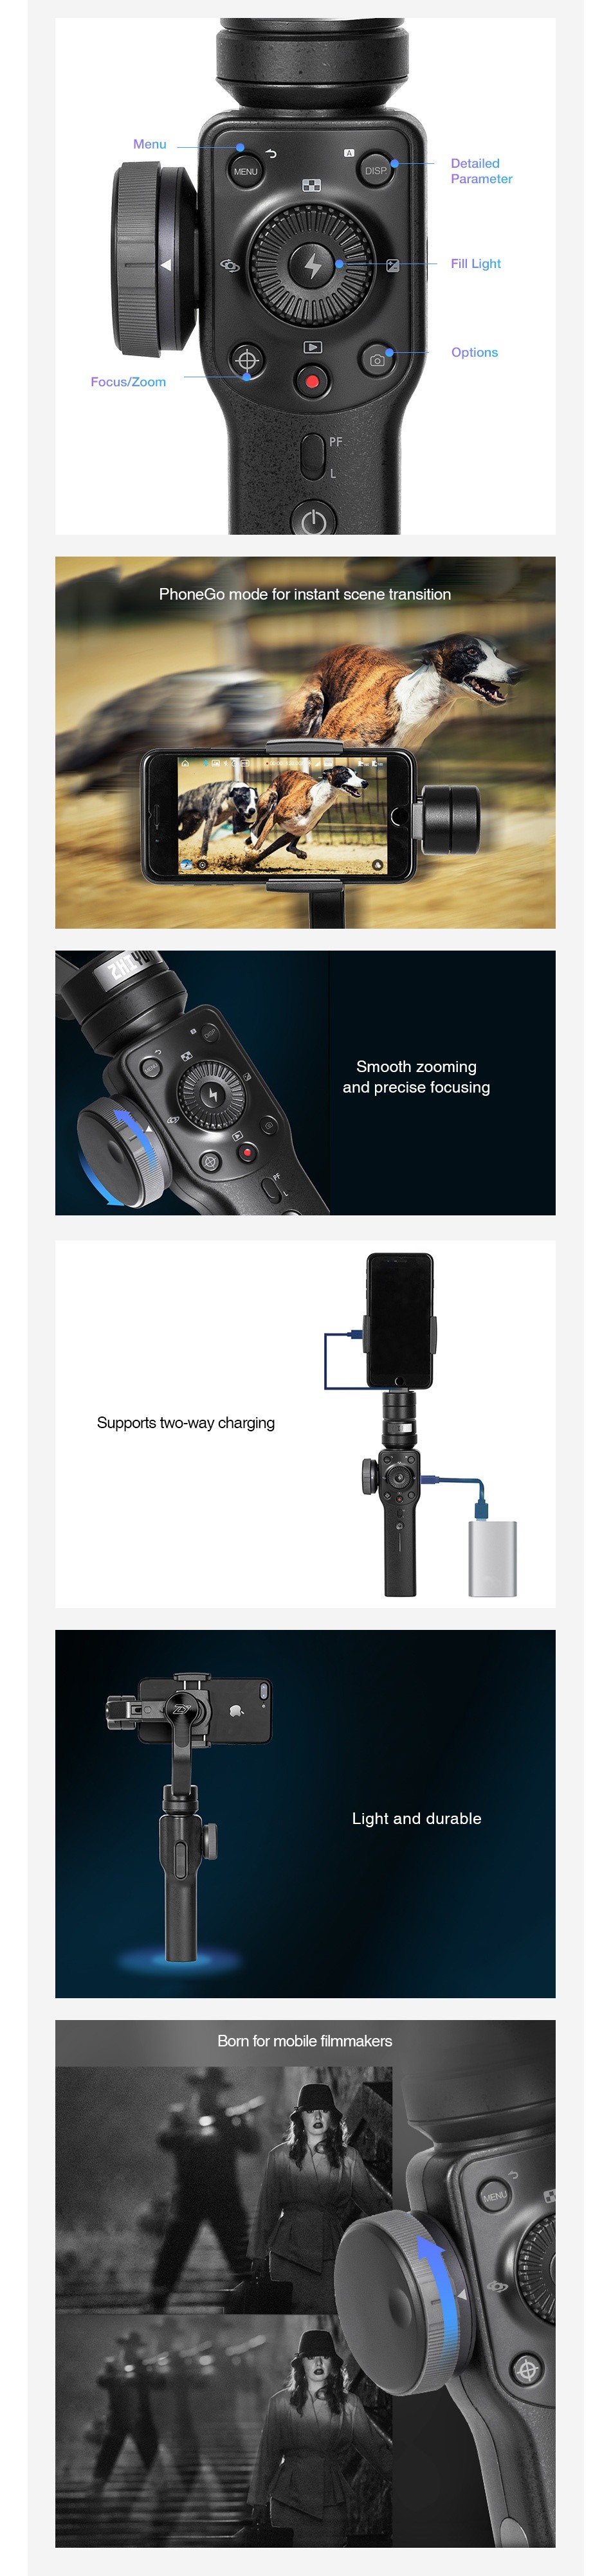 Zhiyun Smooth 4 3-Axis Handhelp Gimbal Stabilizer for Smartphone 4000mAh Menu OCus Zoc P   d precise focusing Supports two way charging Light and durable Bom for mobile filmmake